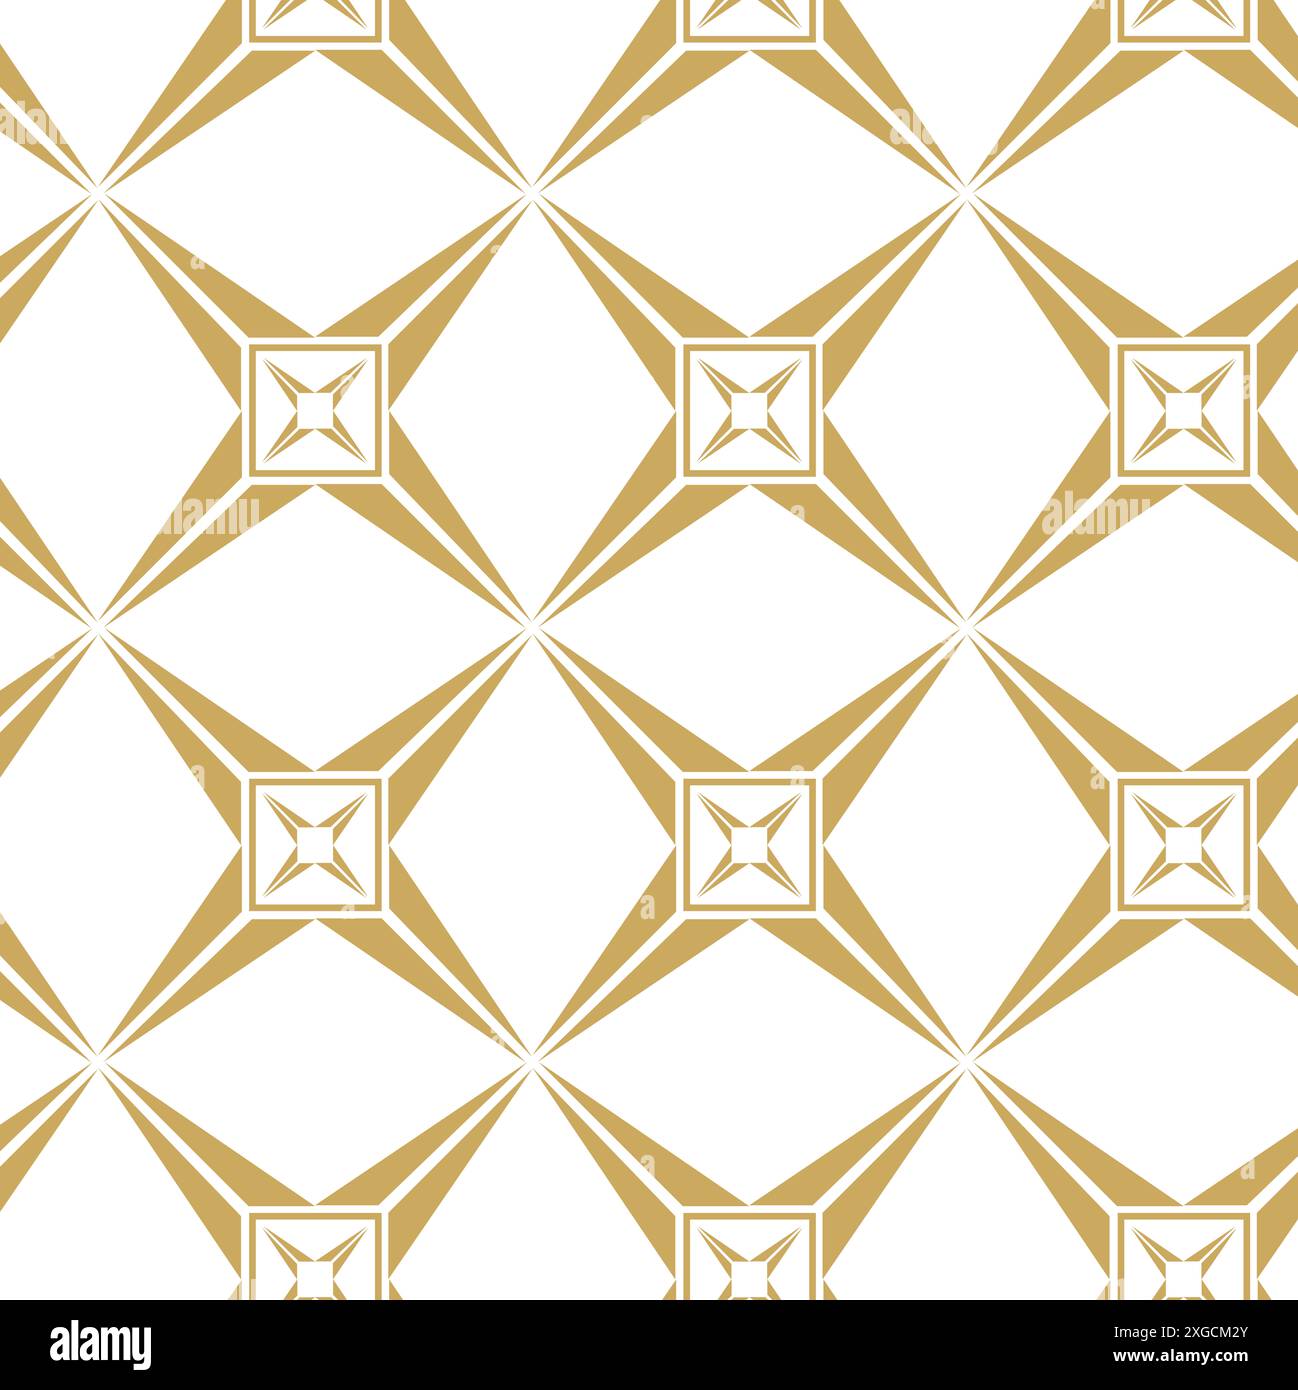 Abstract geometric pattern with stars, stripes, lines. Seamless vector background. White and gold floral ornament. Modern reticulated graphic design. Stock Photo